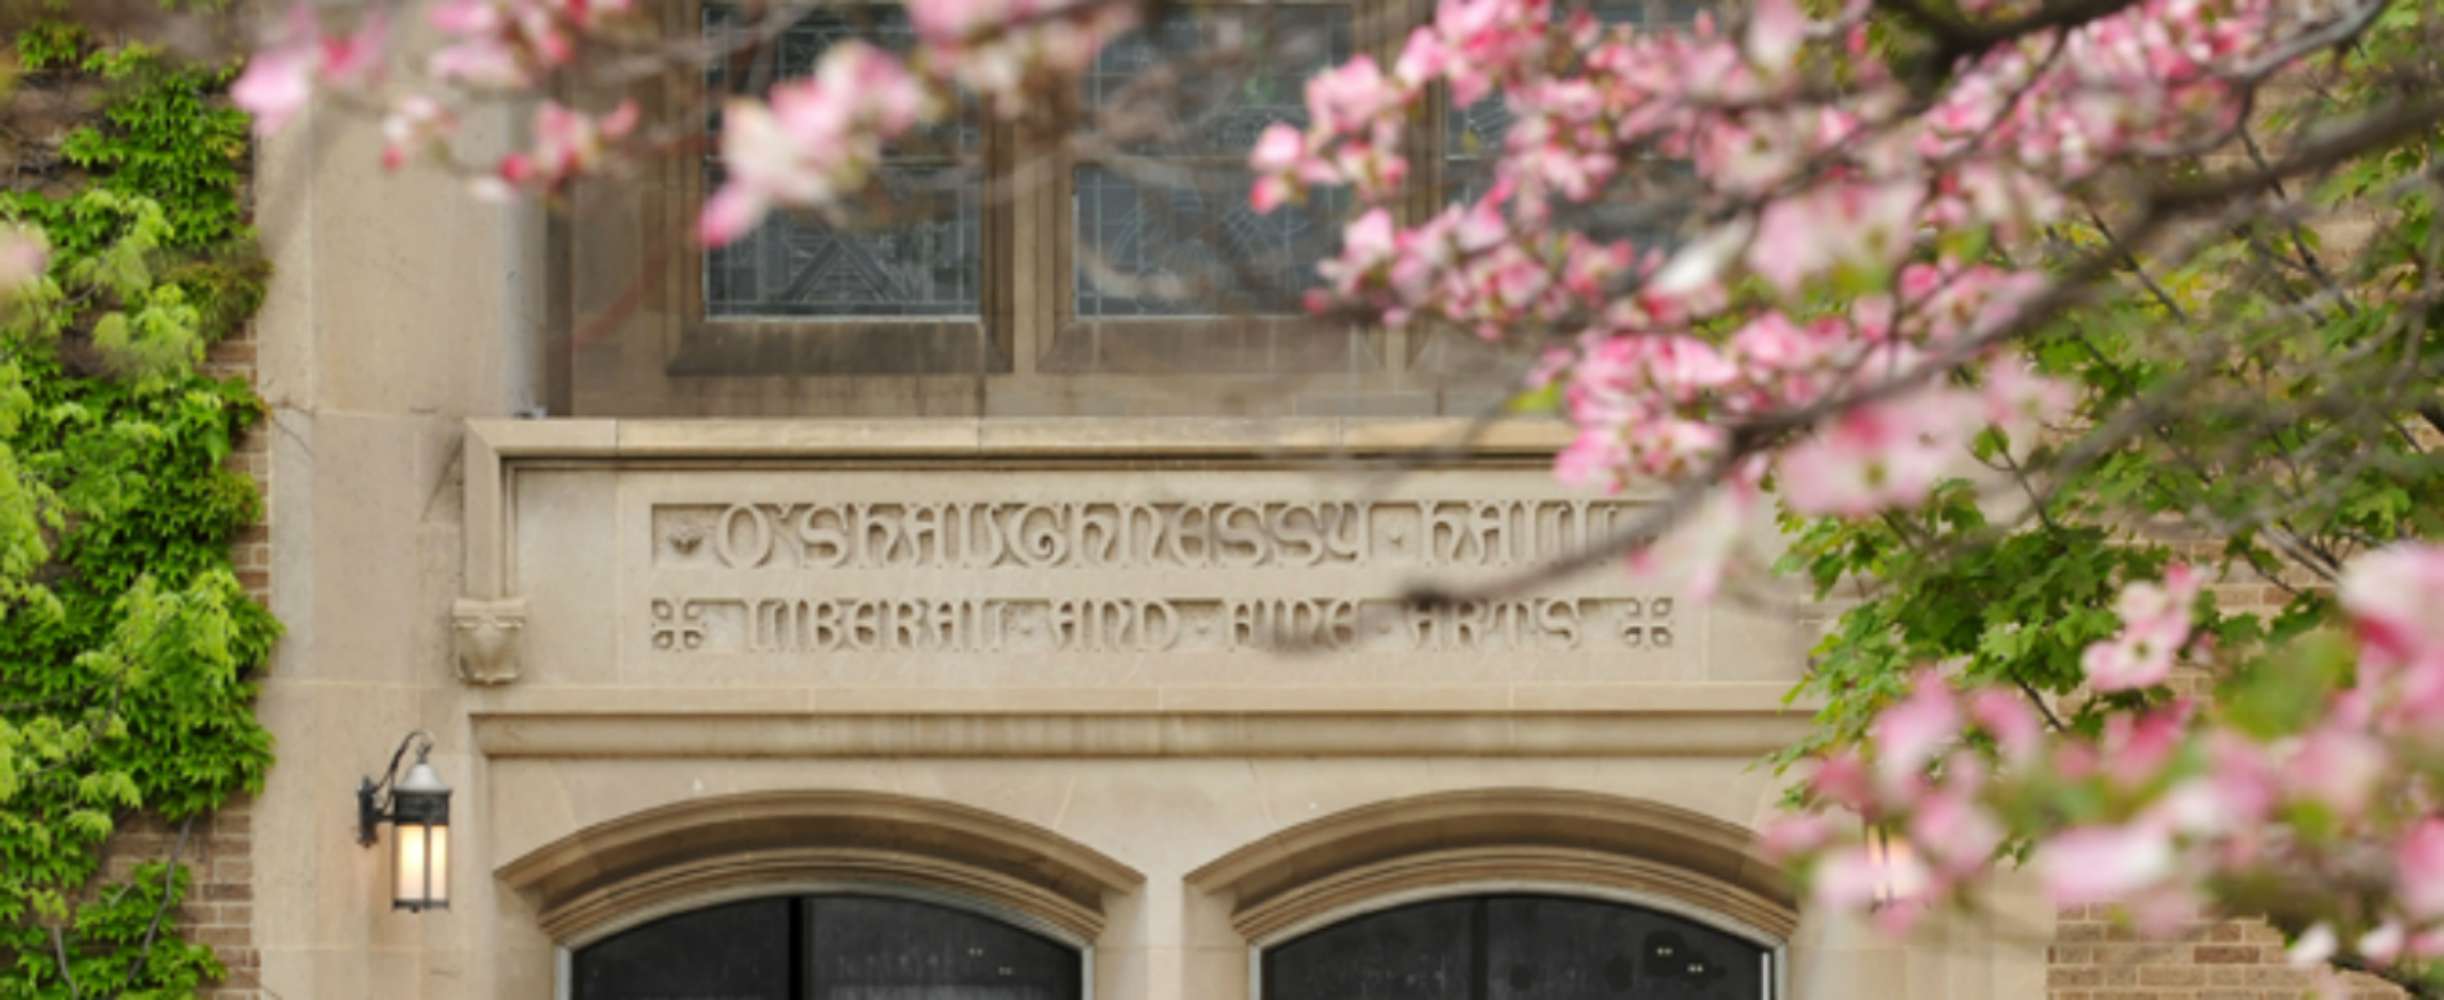 O'Shaughnessy Hall in the spring